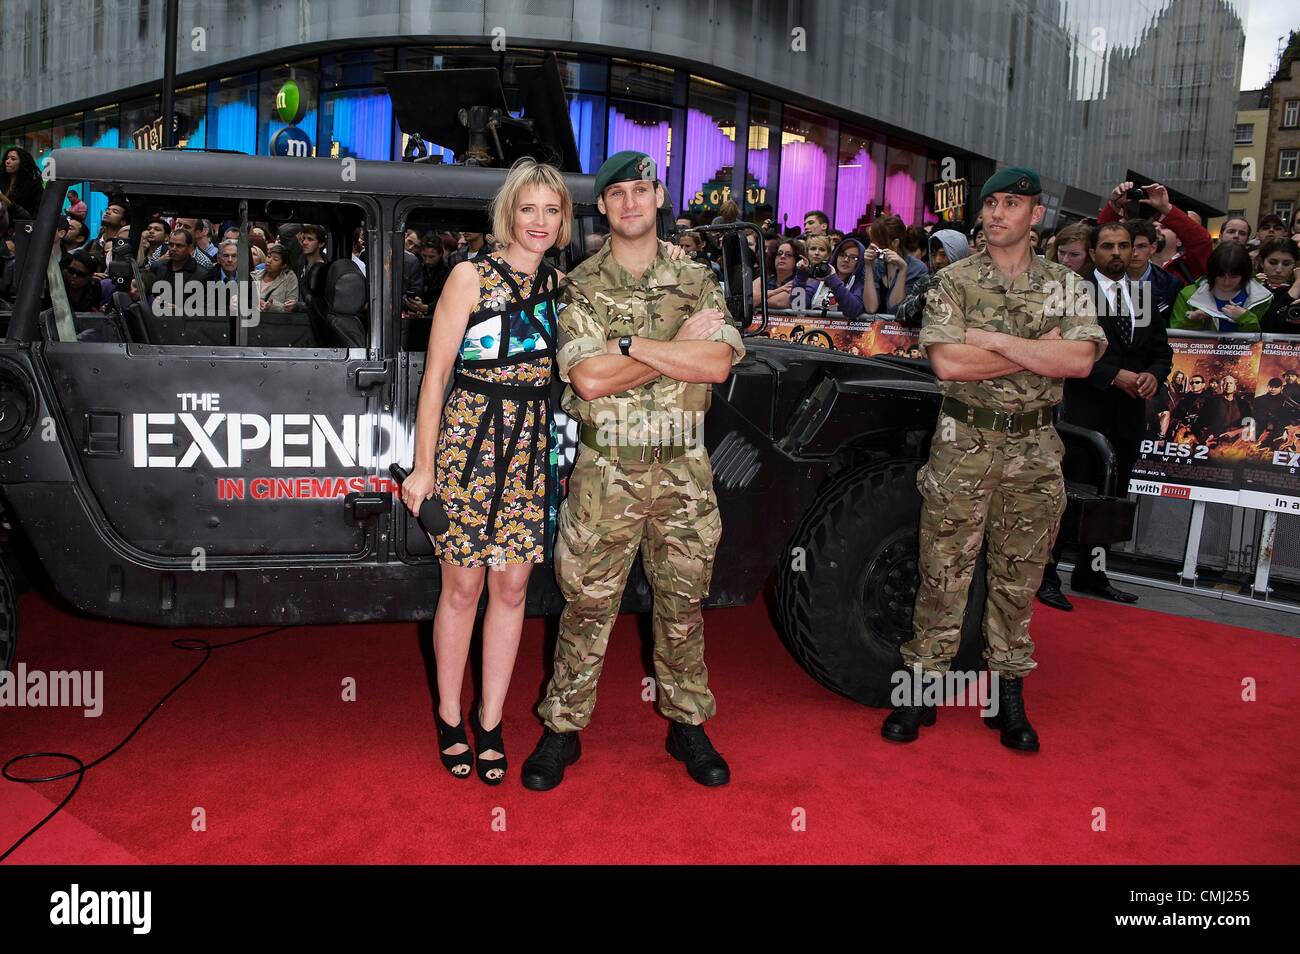 13th Aug 2012. Edith Bowman attends UK Premiere of the film Expendables 2 on 13/08/2012 at The Empire Leicester Square, London. Persons pictured: Edith Bowman . Picture by Julie Edward Credit:  JEP Celebrity Photos / Alamy Live News Stock Photo